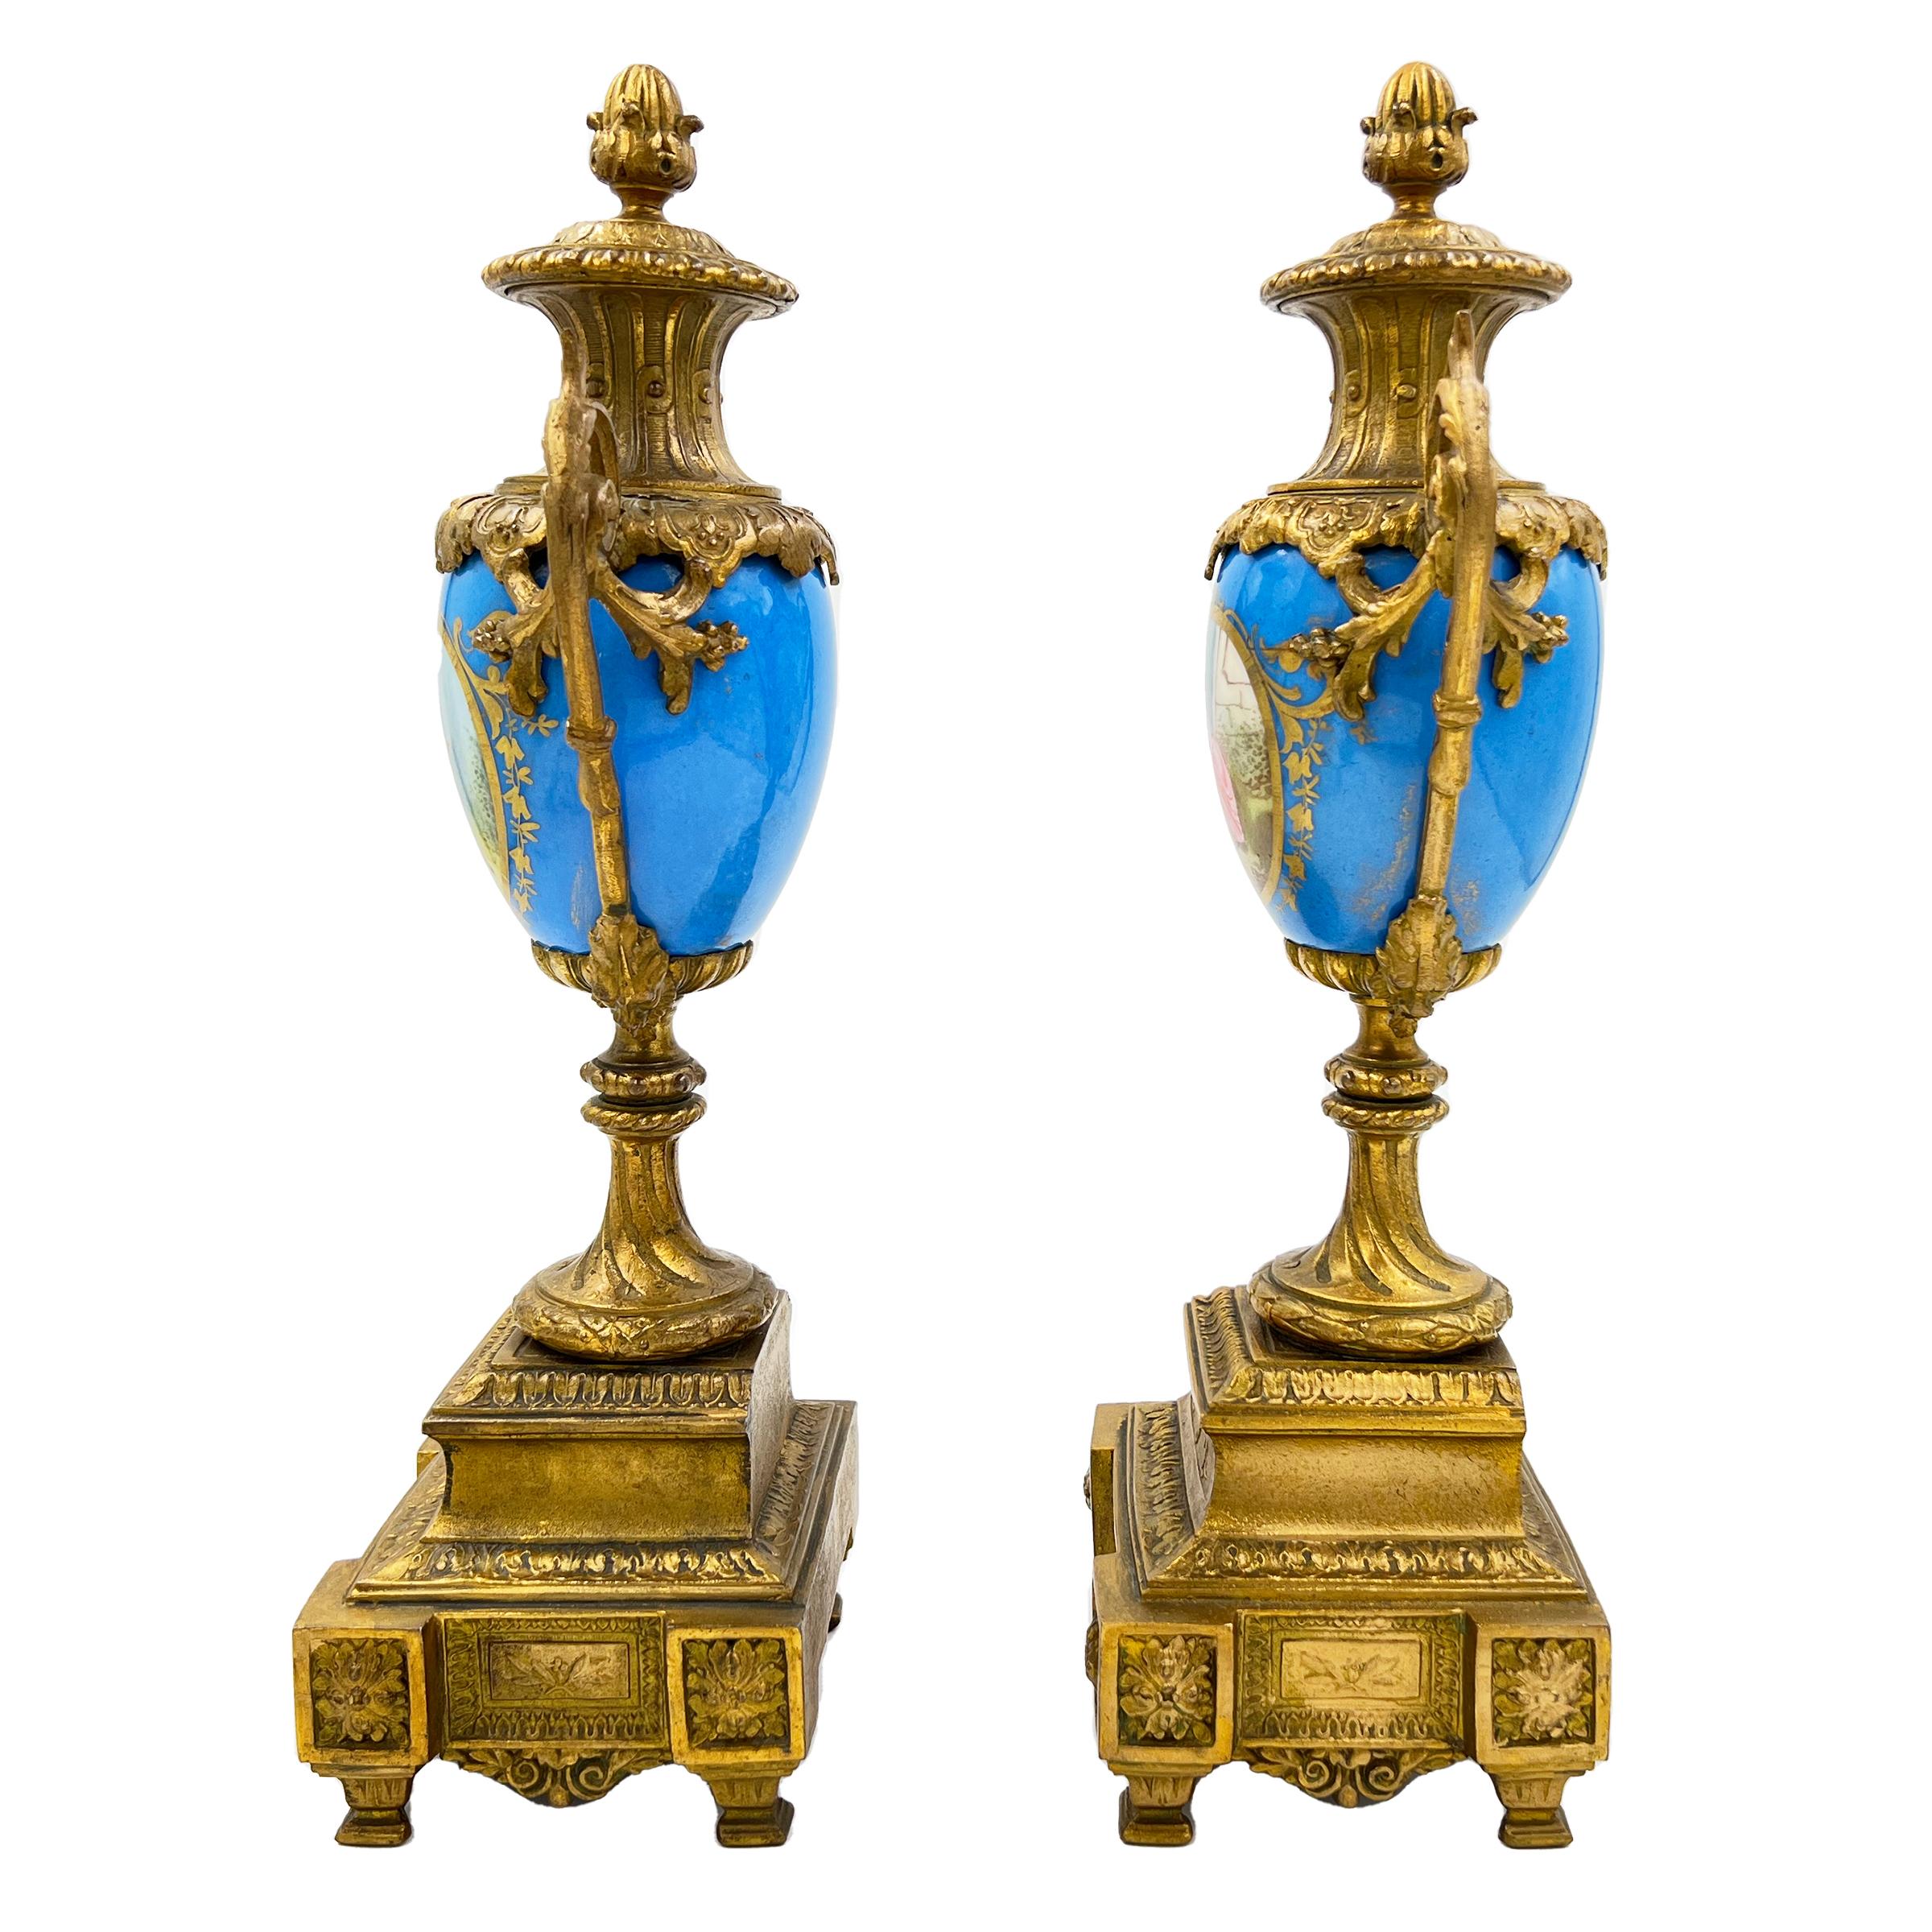 Exquisite pair of French Sevres-style porcelain urns adorned with gilt bronze mounts, featuring a celestial blue porcelain and idyllic rural scenes.
